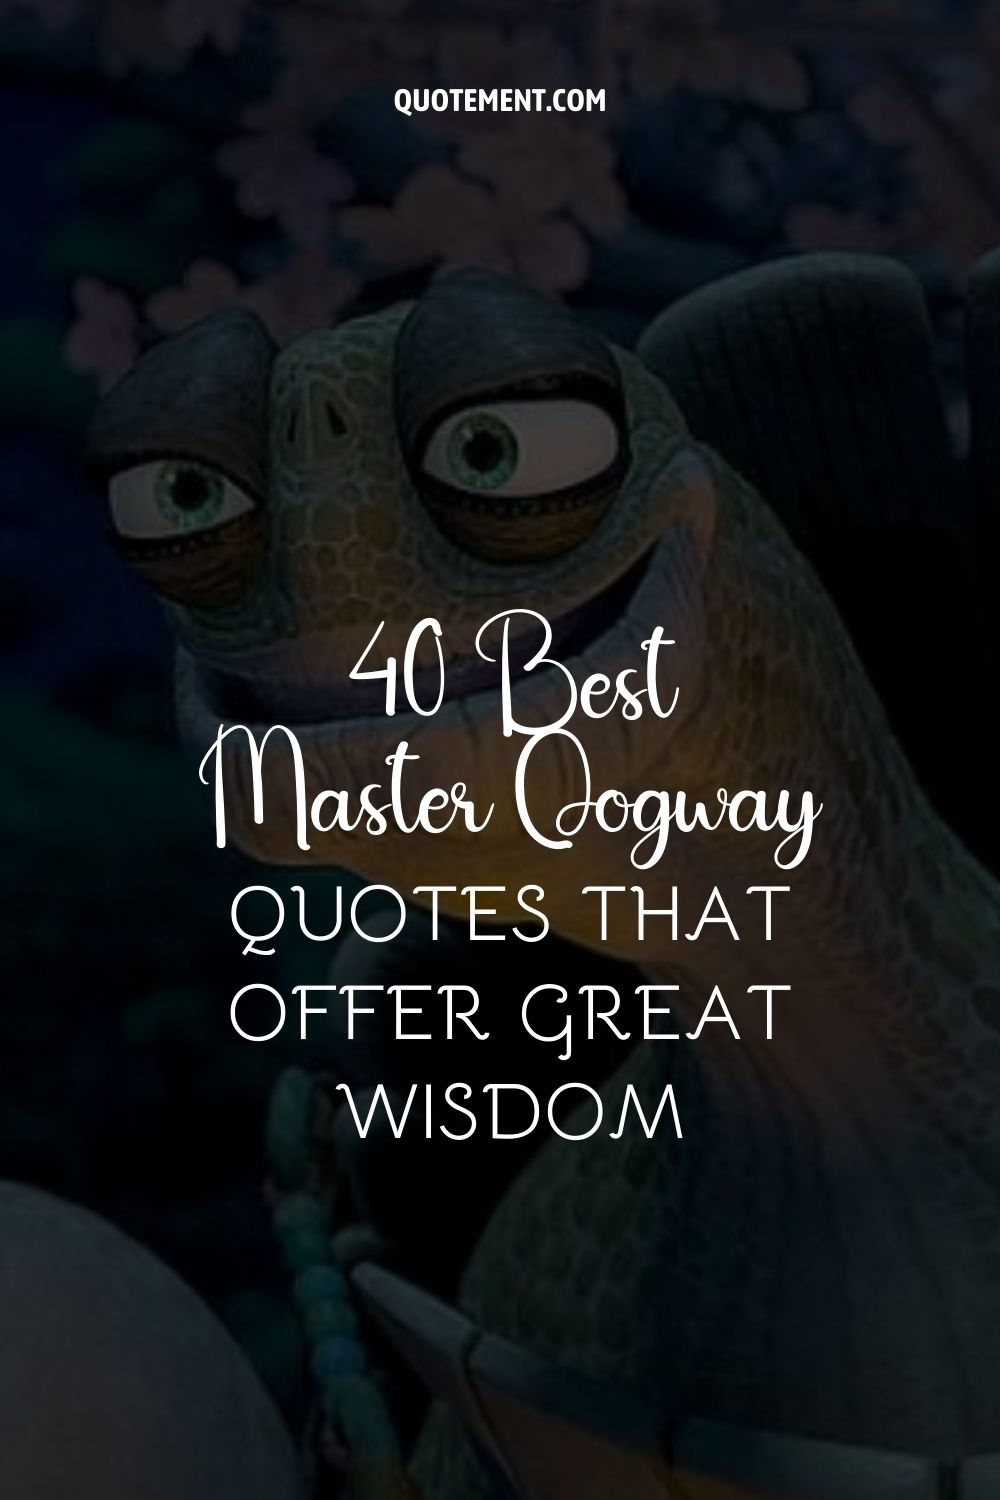 40 Best Master Oogway Quotes That Offer Great Wisdom
